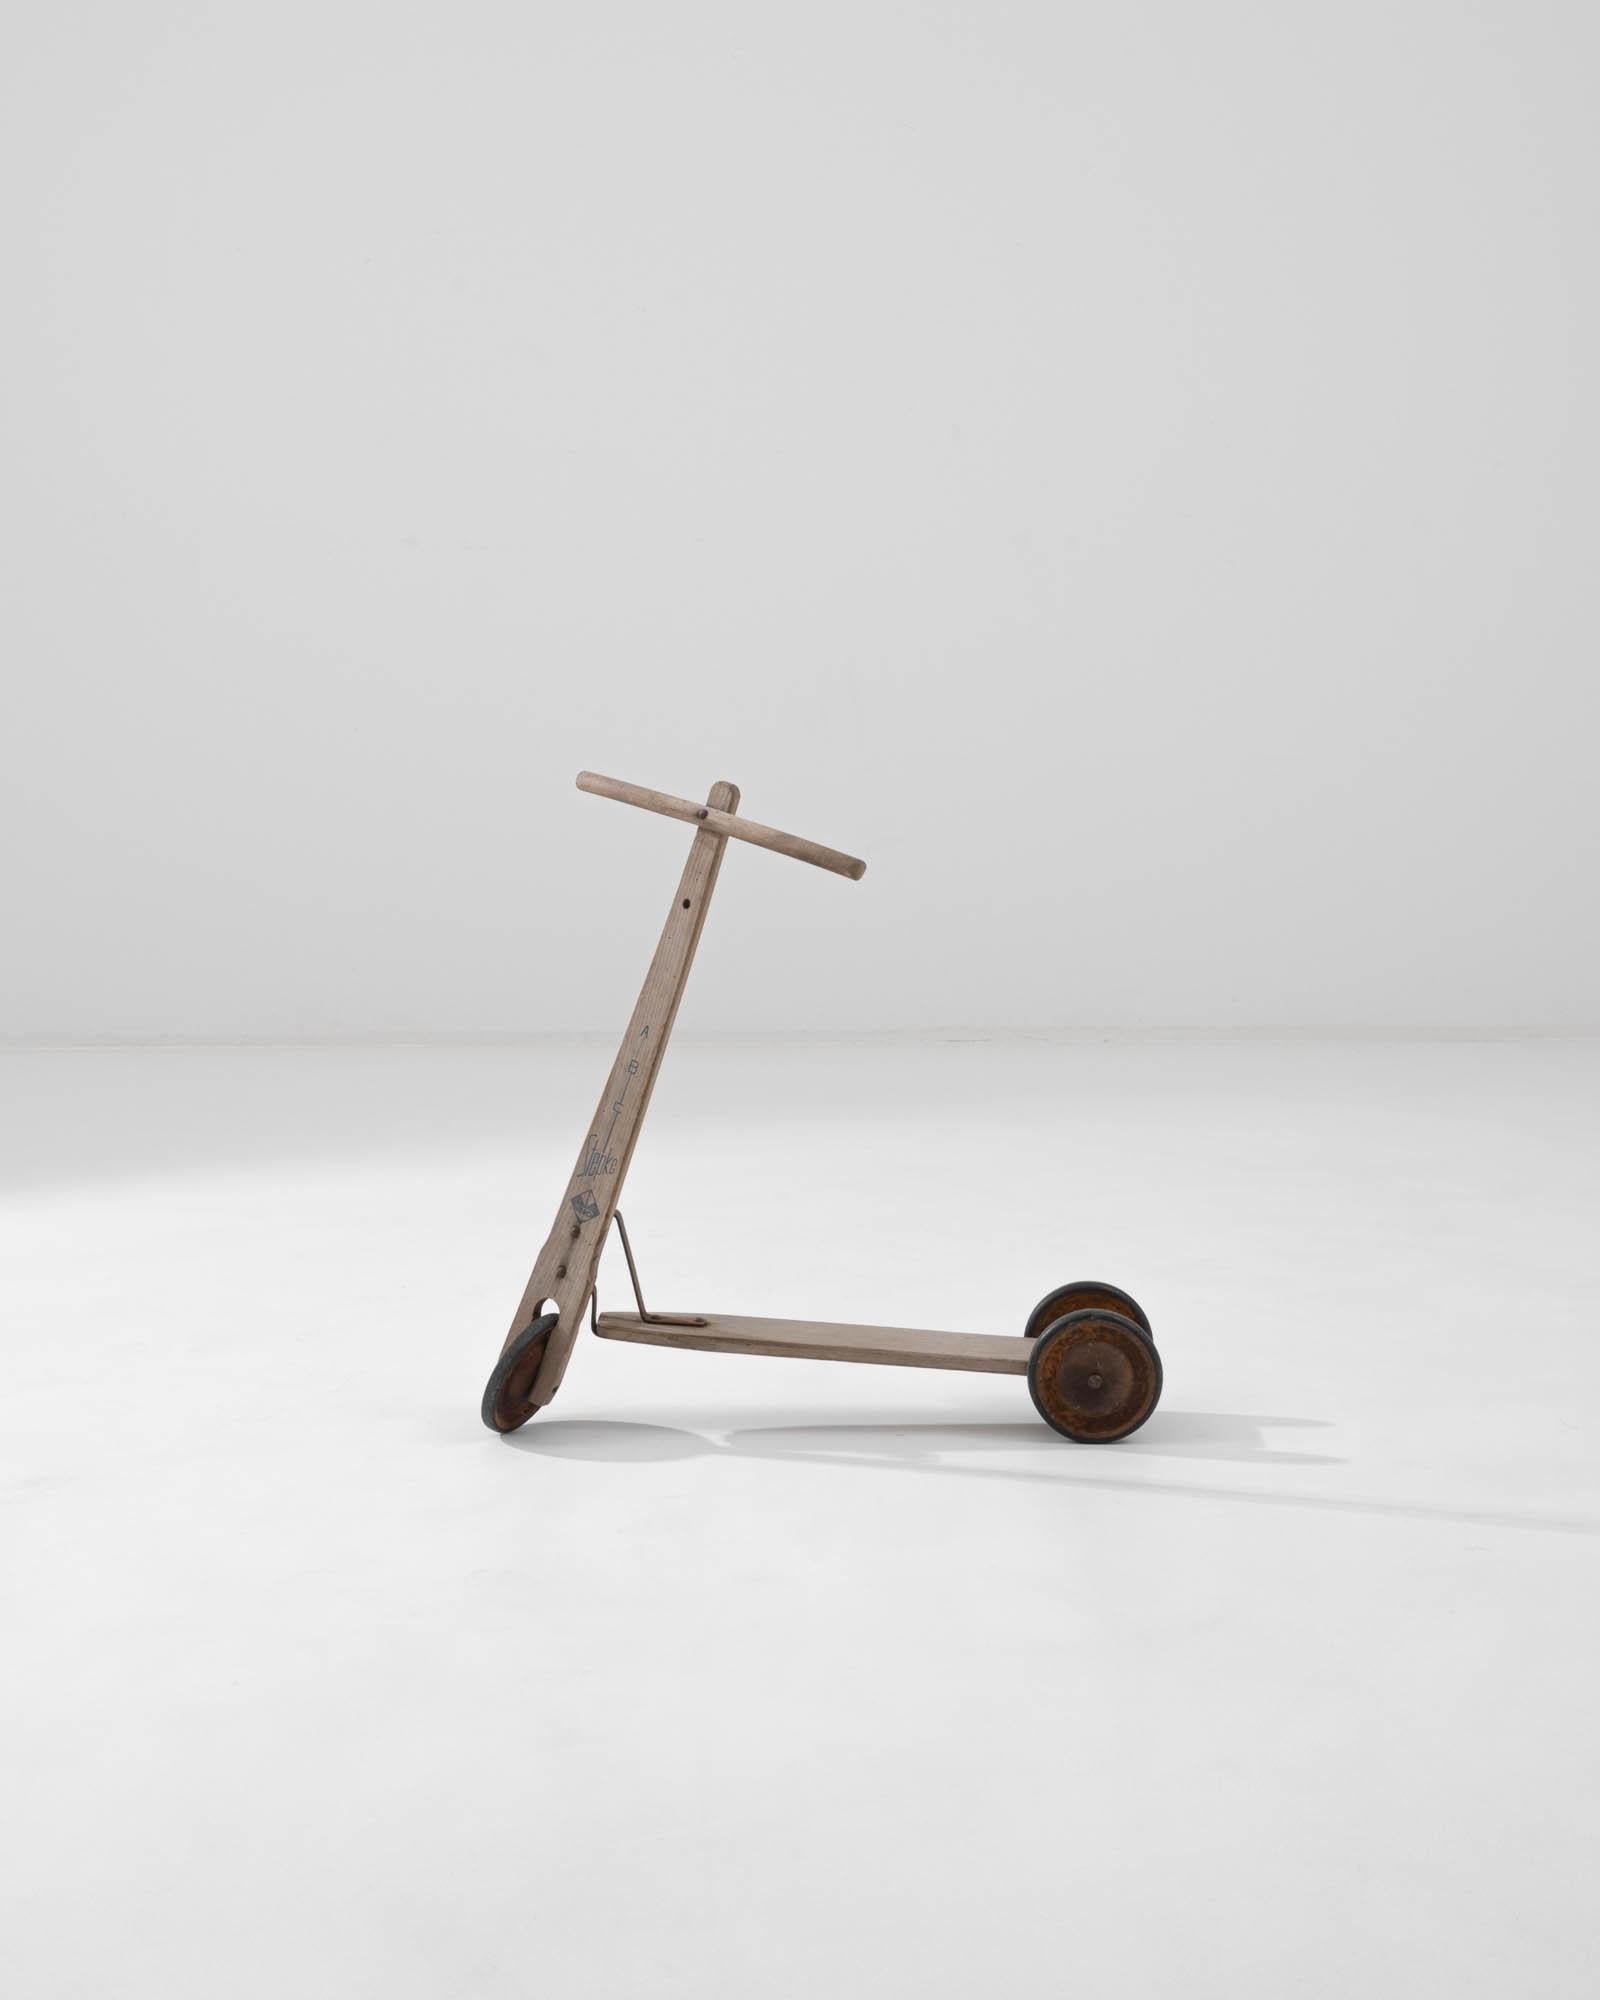 Introducing the 1950s Central European Metal & Wooden Scooter – a delightful piece of post-war history that captures the essence of childhood fun from a simpler time. This charming scooter is expertly crafted from solid wood and metal, featuring a